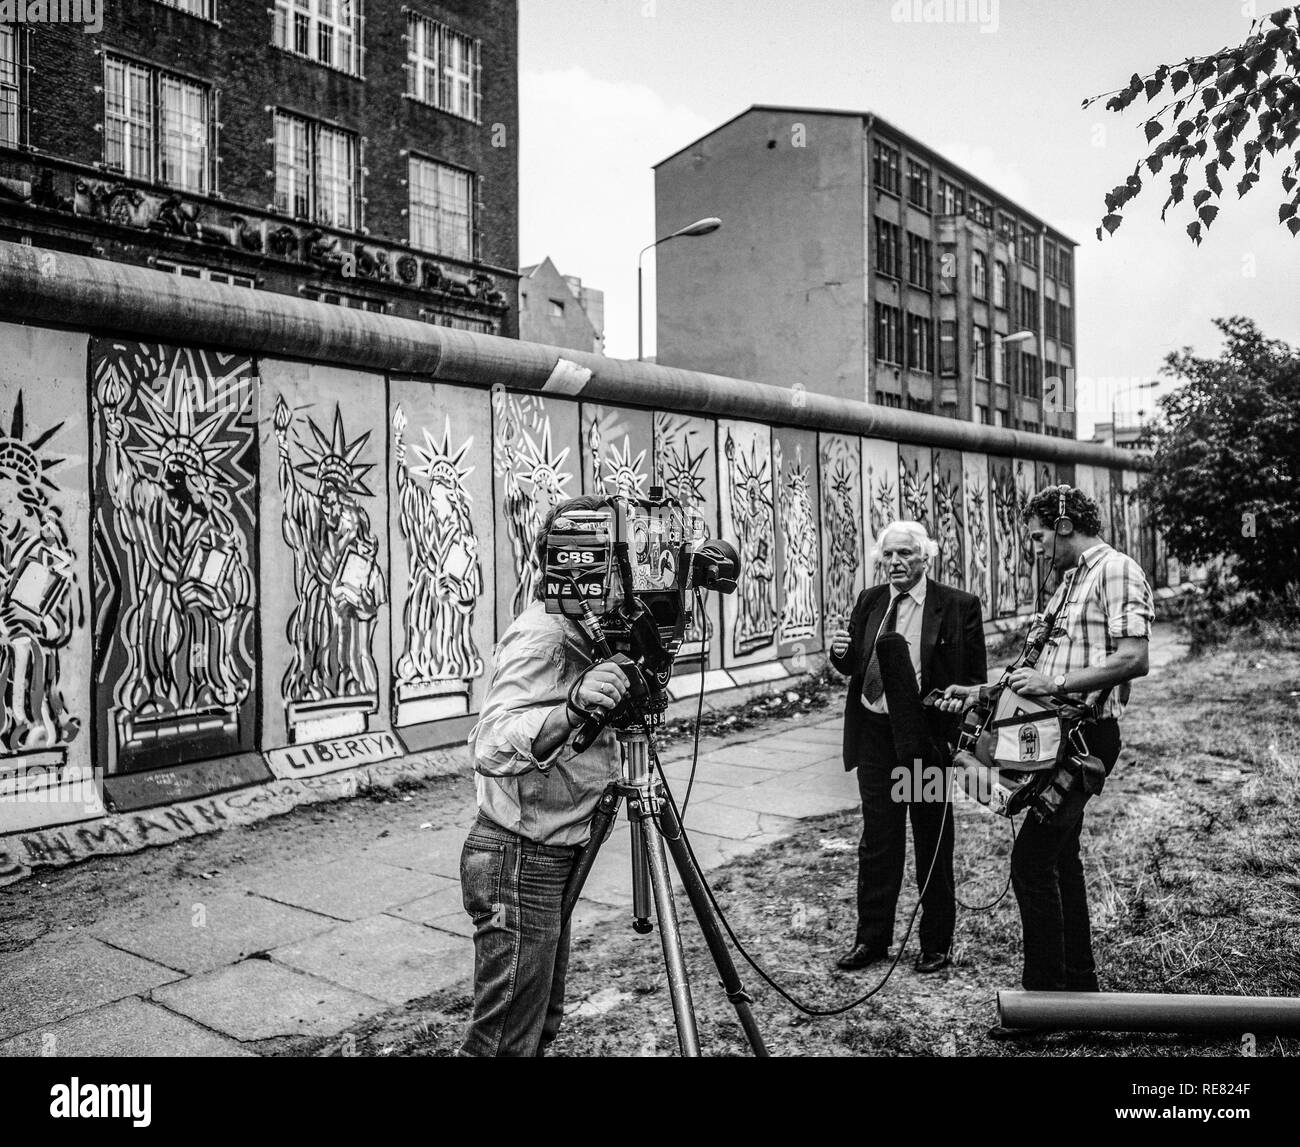 August 1986, CBS TV television crew conducting an interview in front of Berlin Wall decorated with Statue of Liberty frescos, West Berlin side, Germany, Europe, Stock Photo